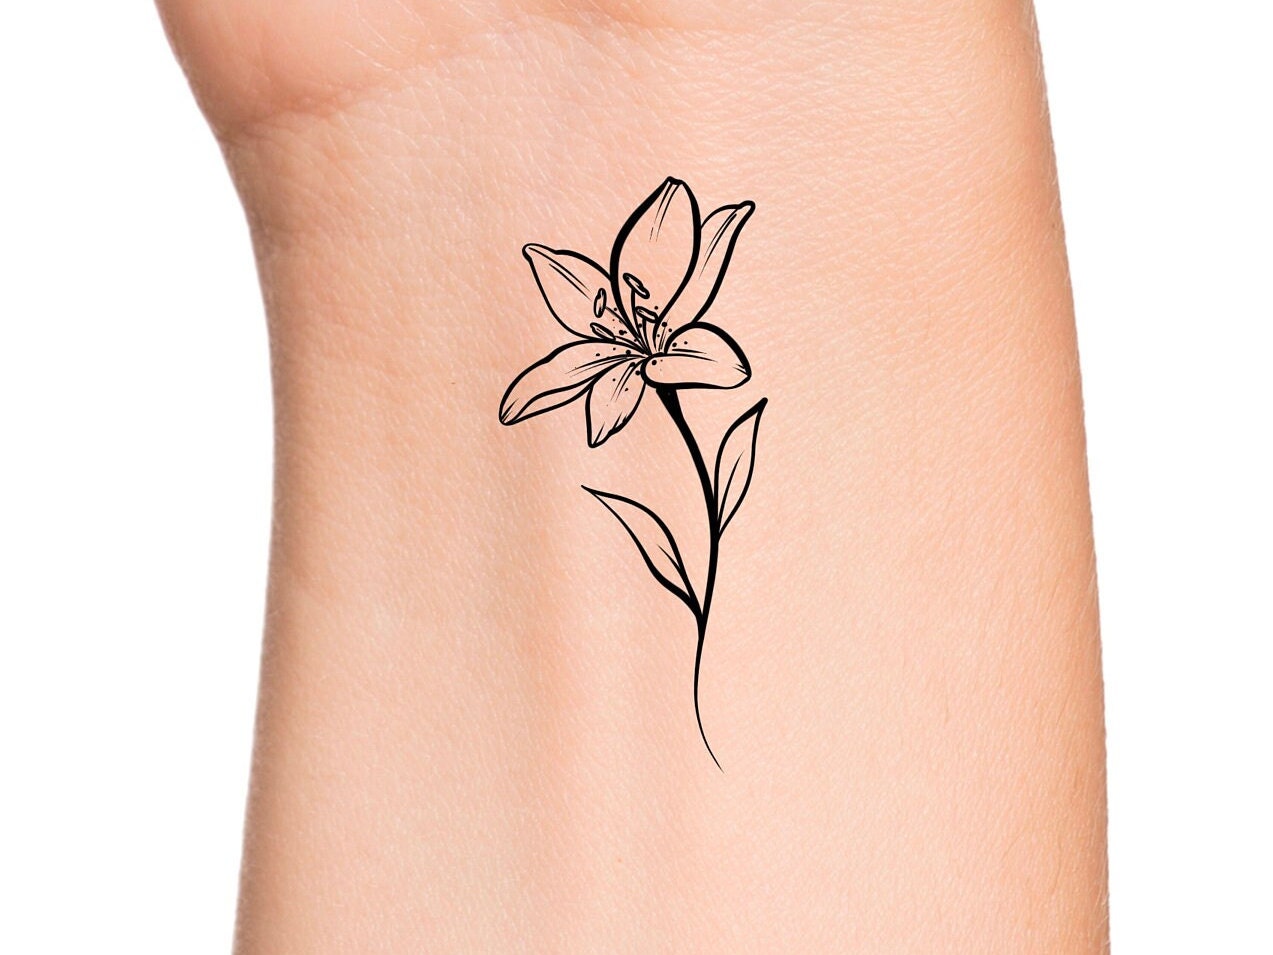 Tattoo Sticker Temporary Cute Flower Red Spider Snake Lily Small Waterproof  Fake Tatto Flash Hand Tatoo For Woman Girl Kid 4 - Temporary Tattoos -  AliExpress